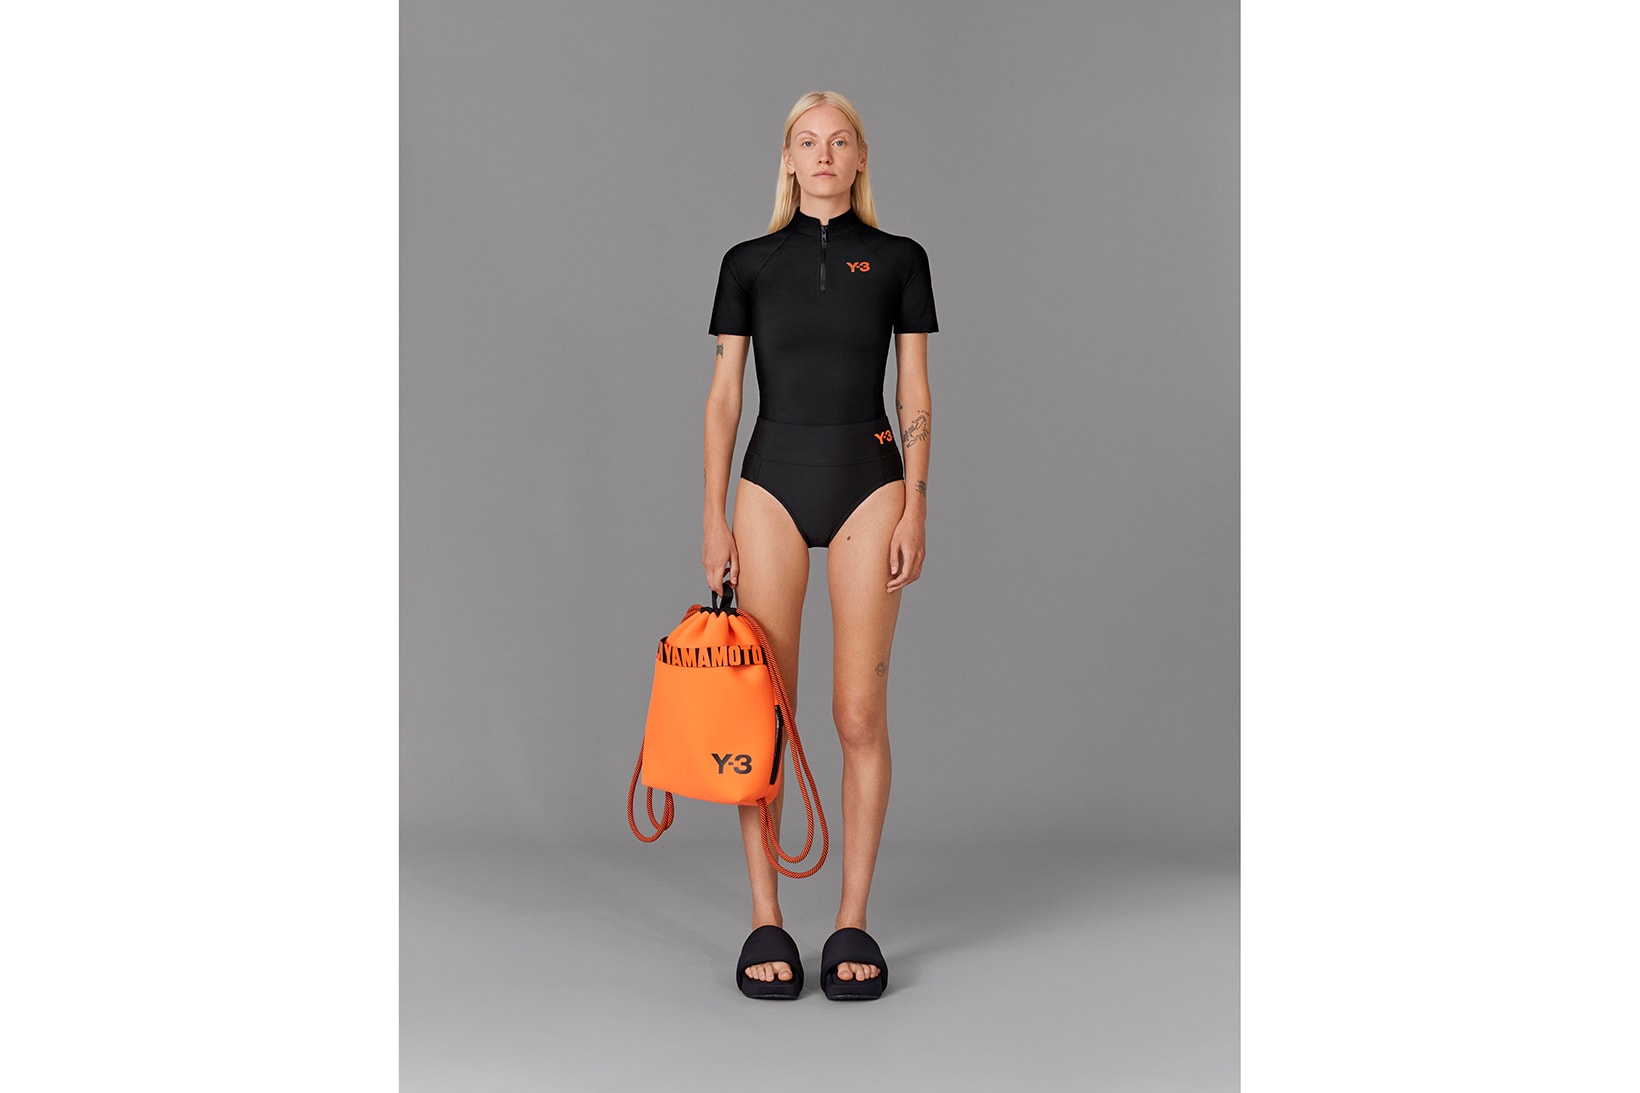 Y-3 Spring Summer 2020 Collection Drop 4 Swim Campaign Adilette Sandals